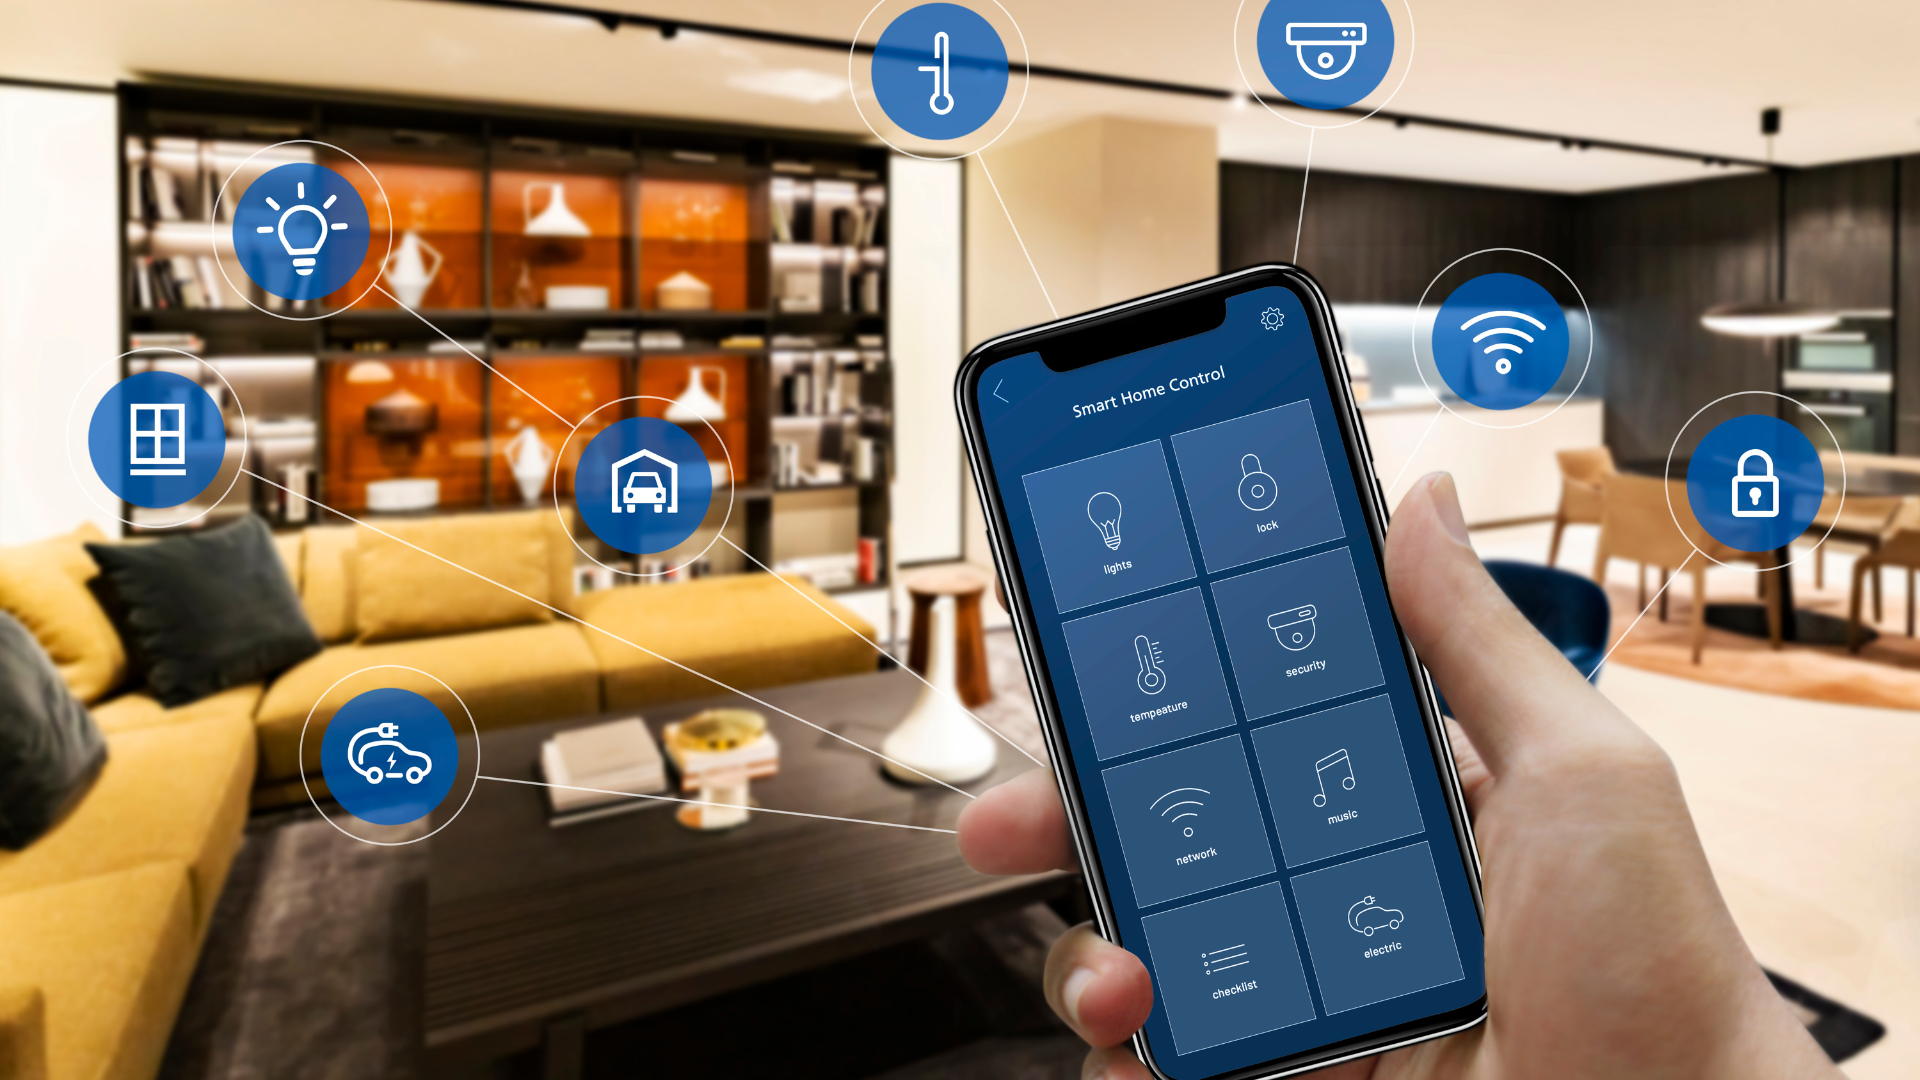 Smart Home Technology in Rental Units